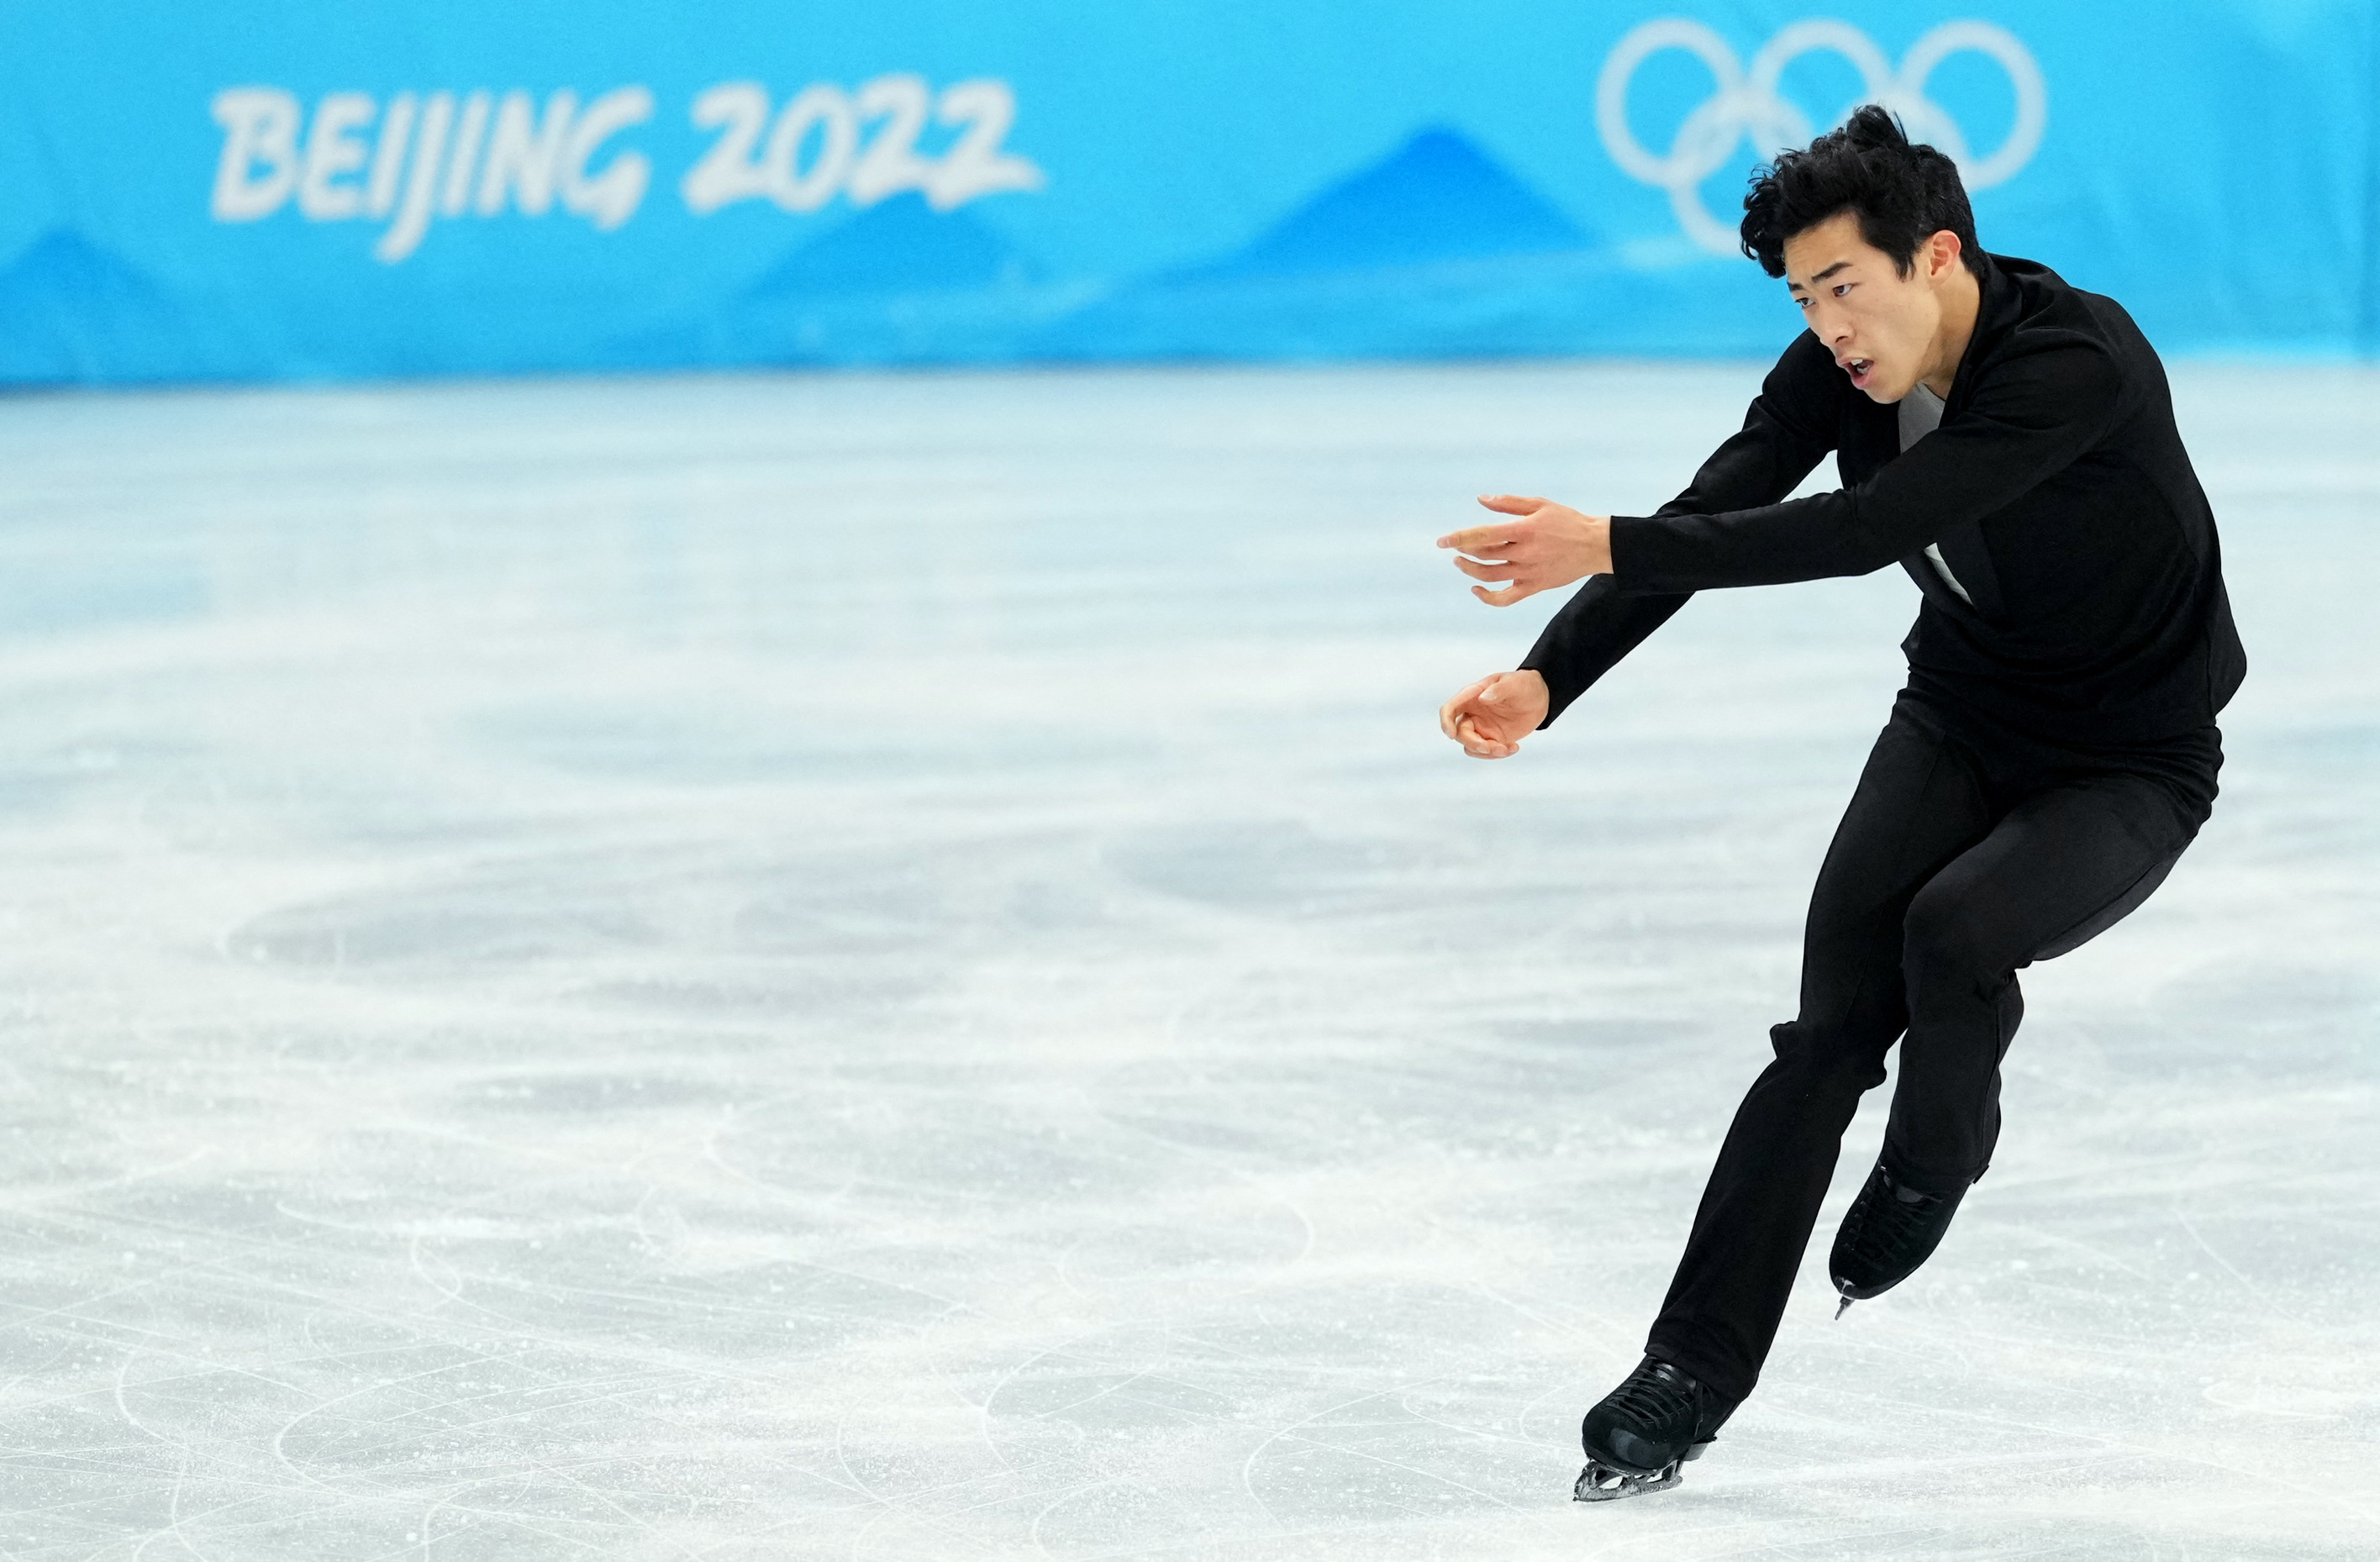 Single Skating: Nathan Chen, Known as the "Quad King" for his mastery of quadruple jumps. 2840x1860 HD Wallpaper.